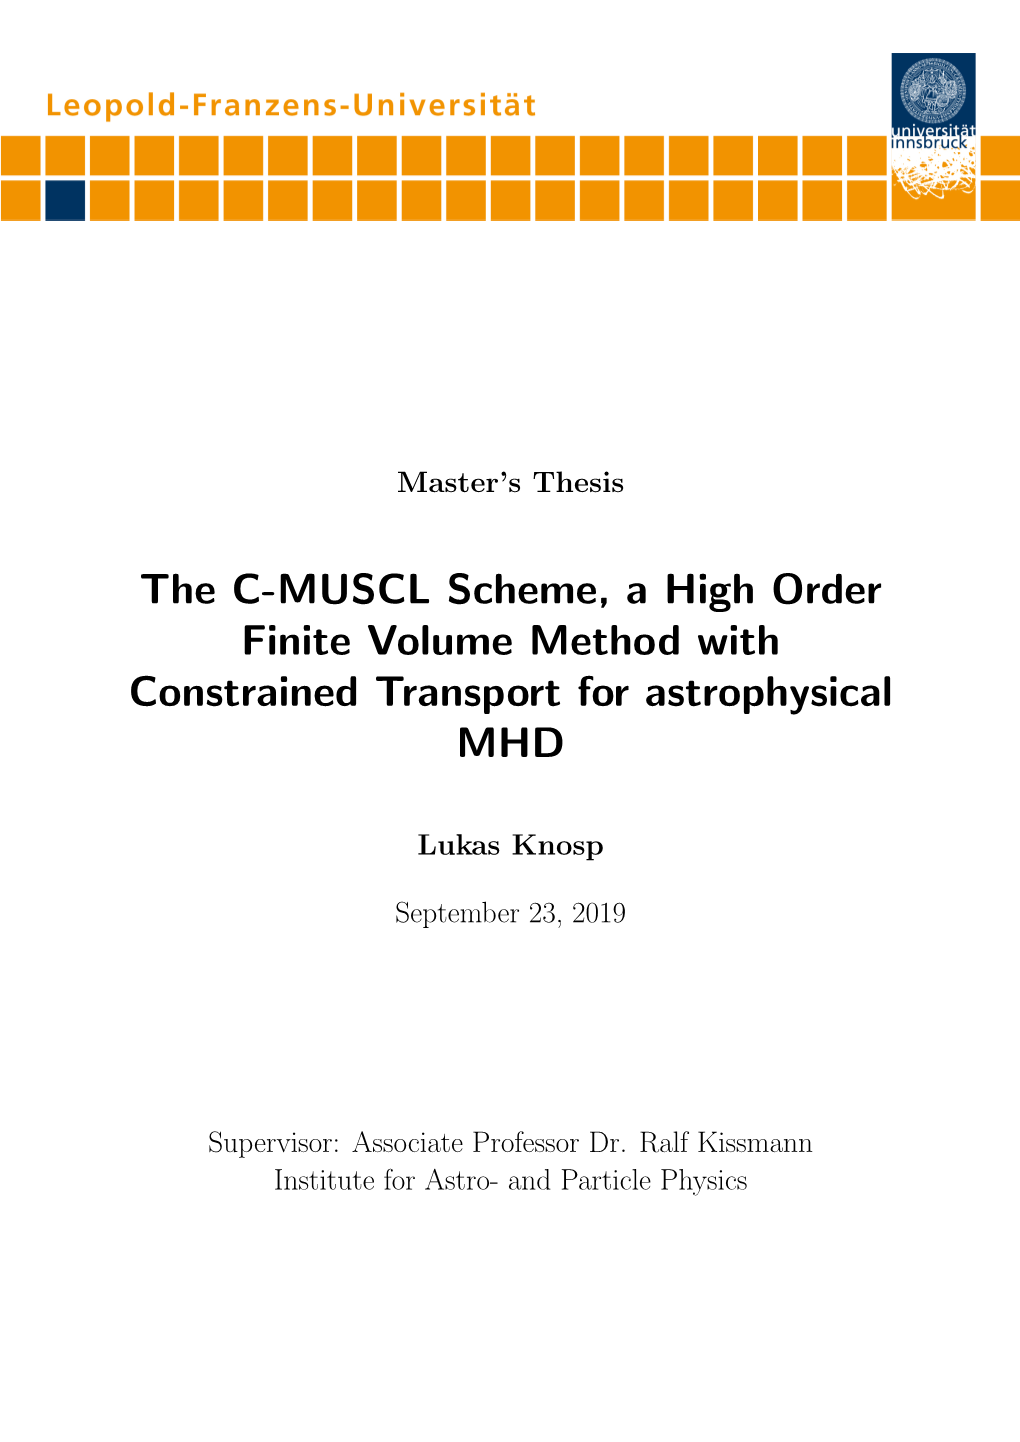 The C-MUSCL Scheme, a High Order Finite Volume Method with Constrained Transport for Astrophysical MHD